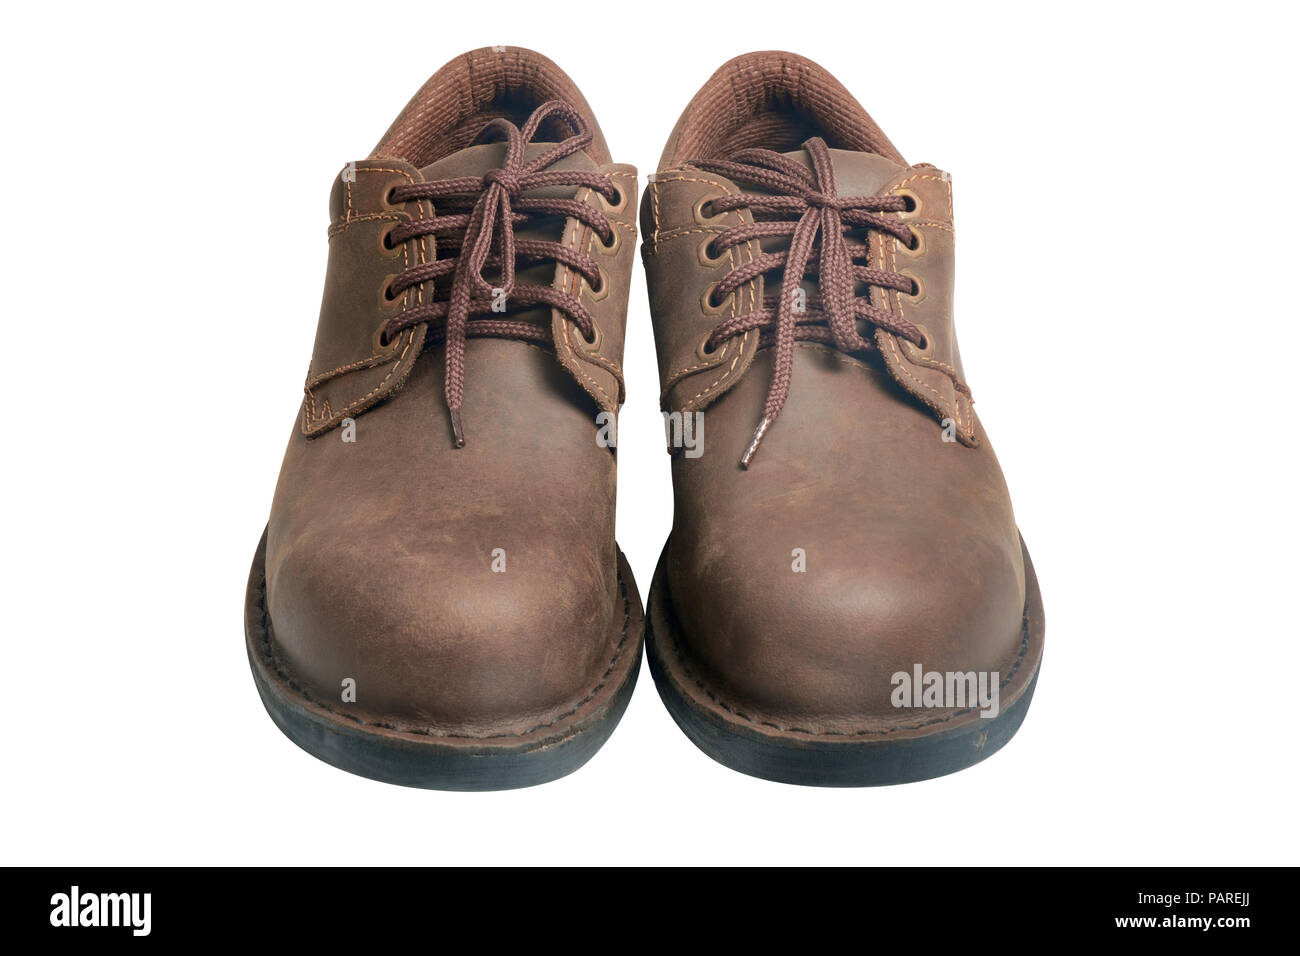 Safety Shoes High Resolution Stock Photography and Images - Alamy